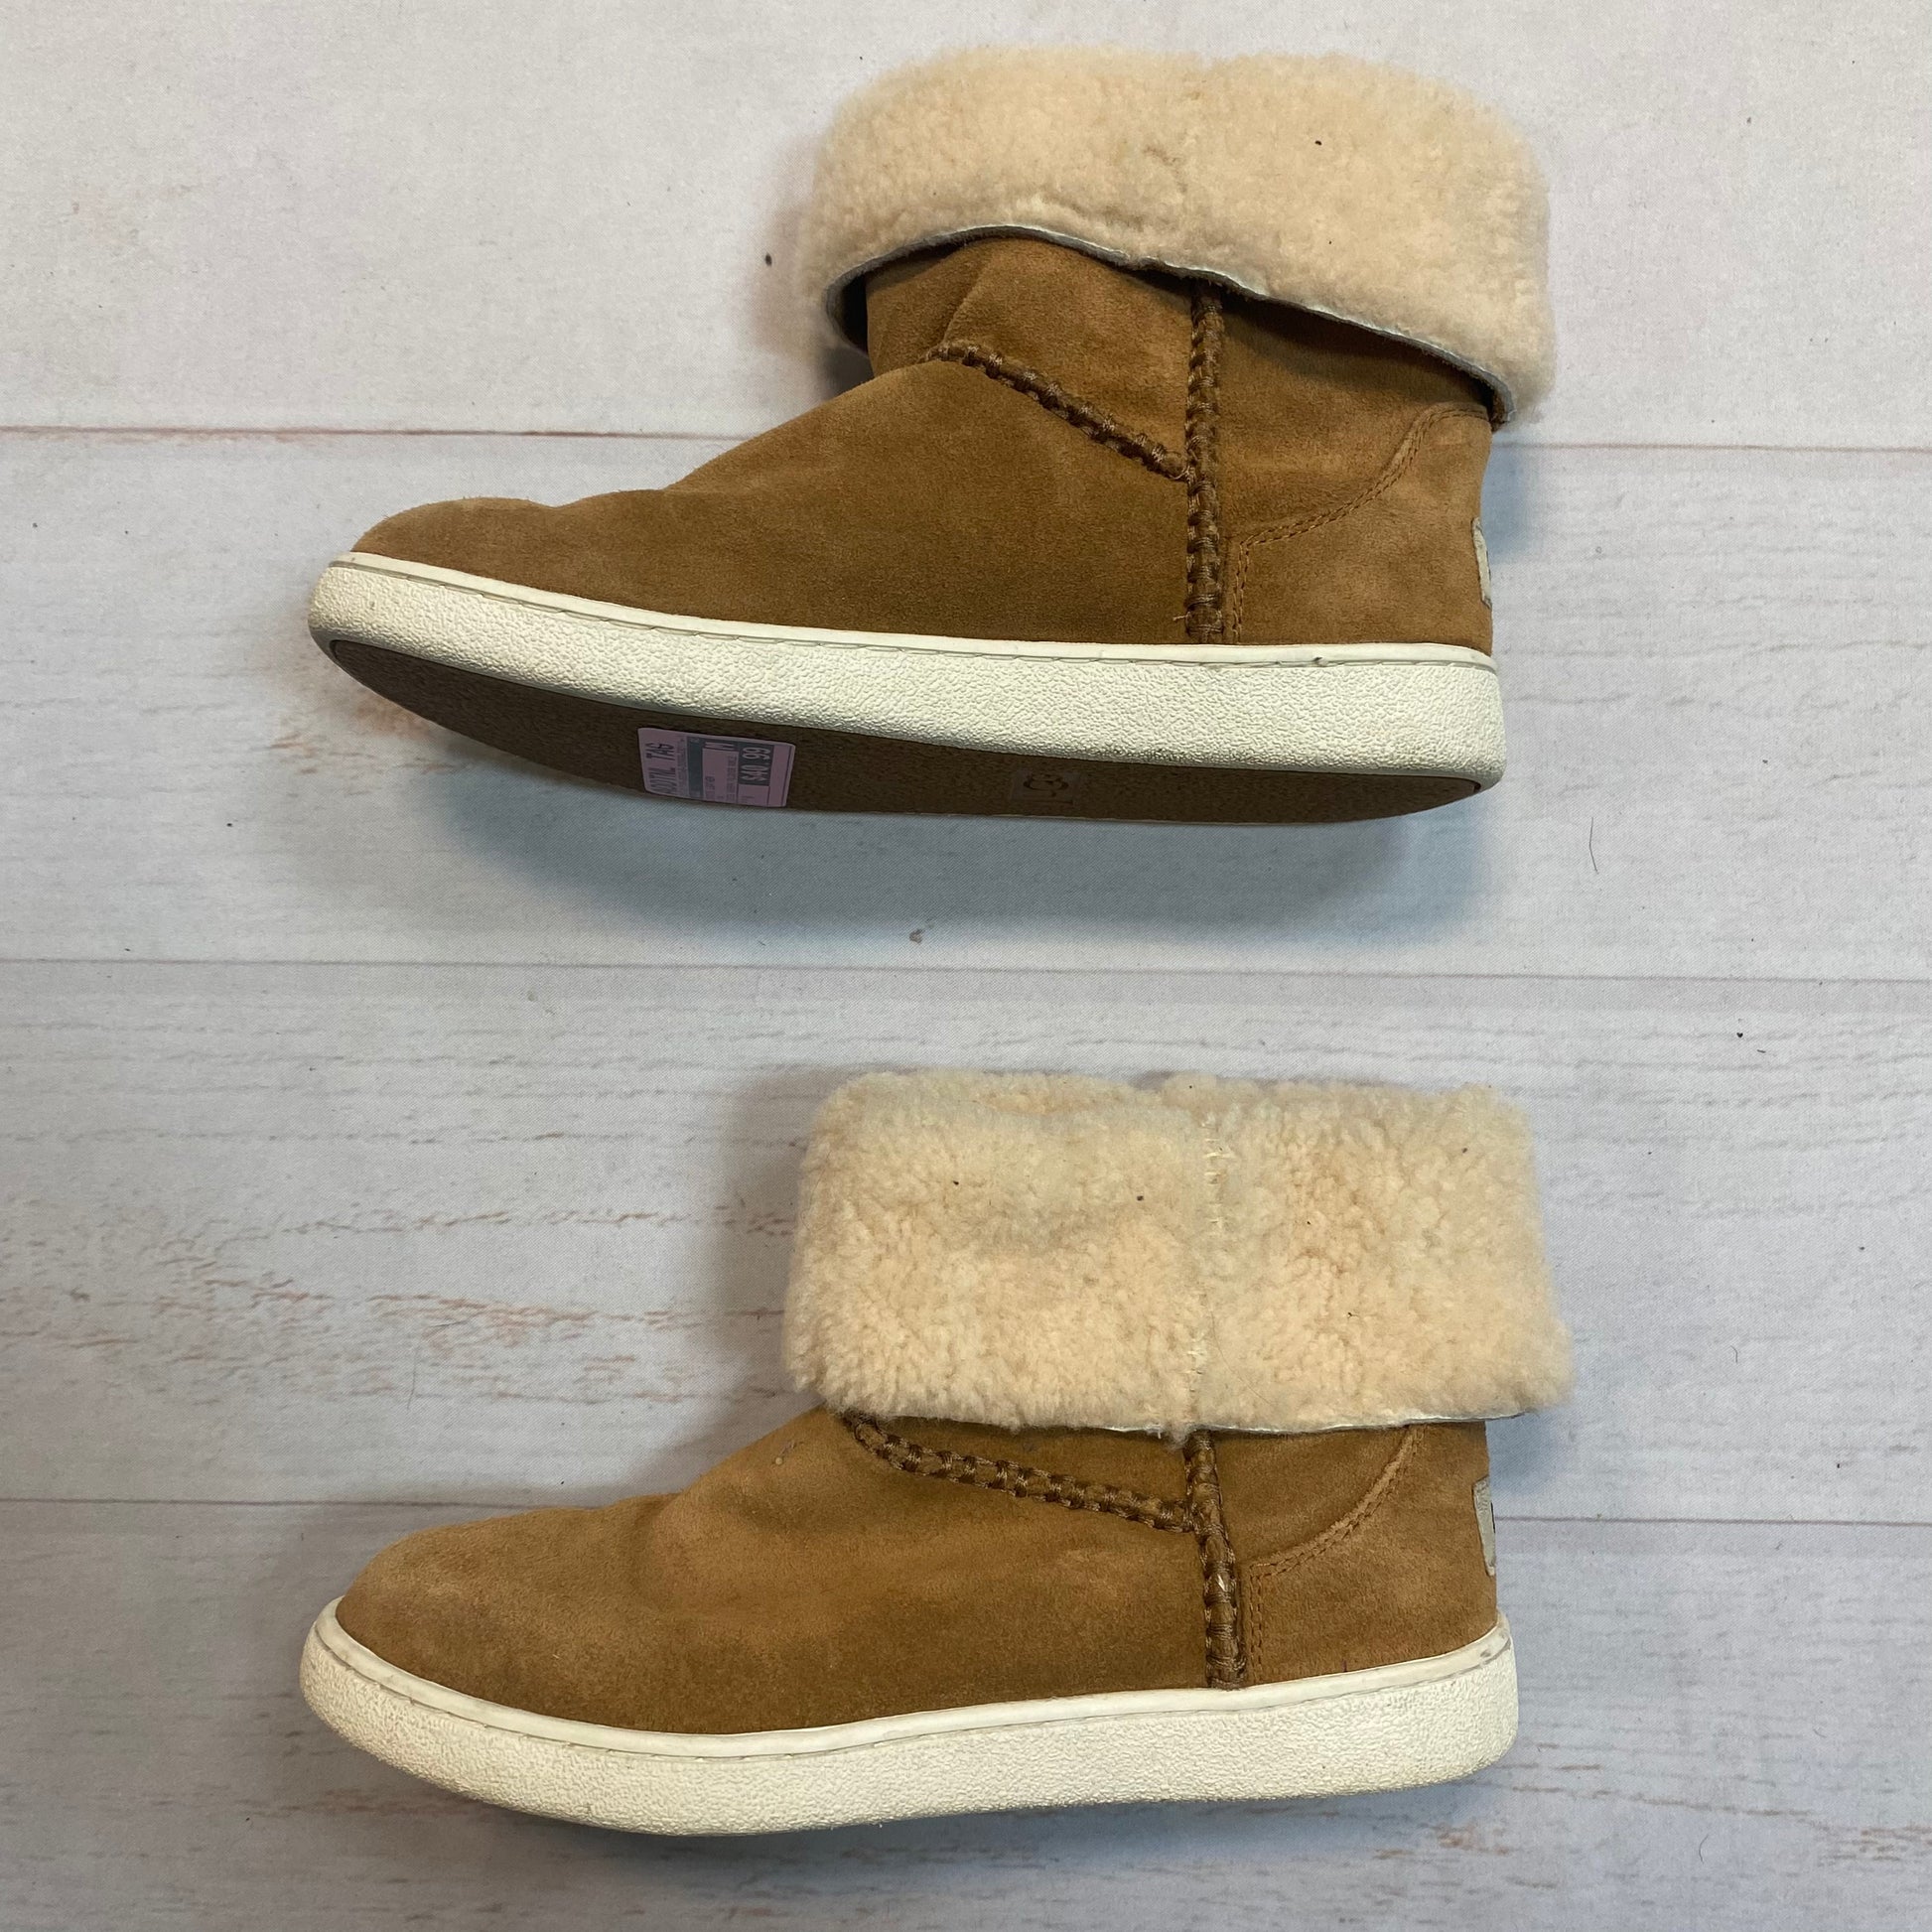 UGG Mika Bootie - Free Shipping